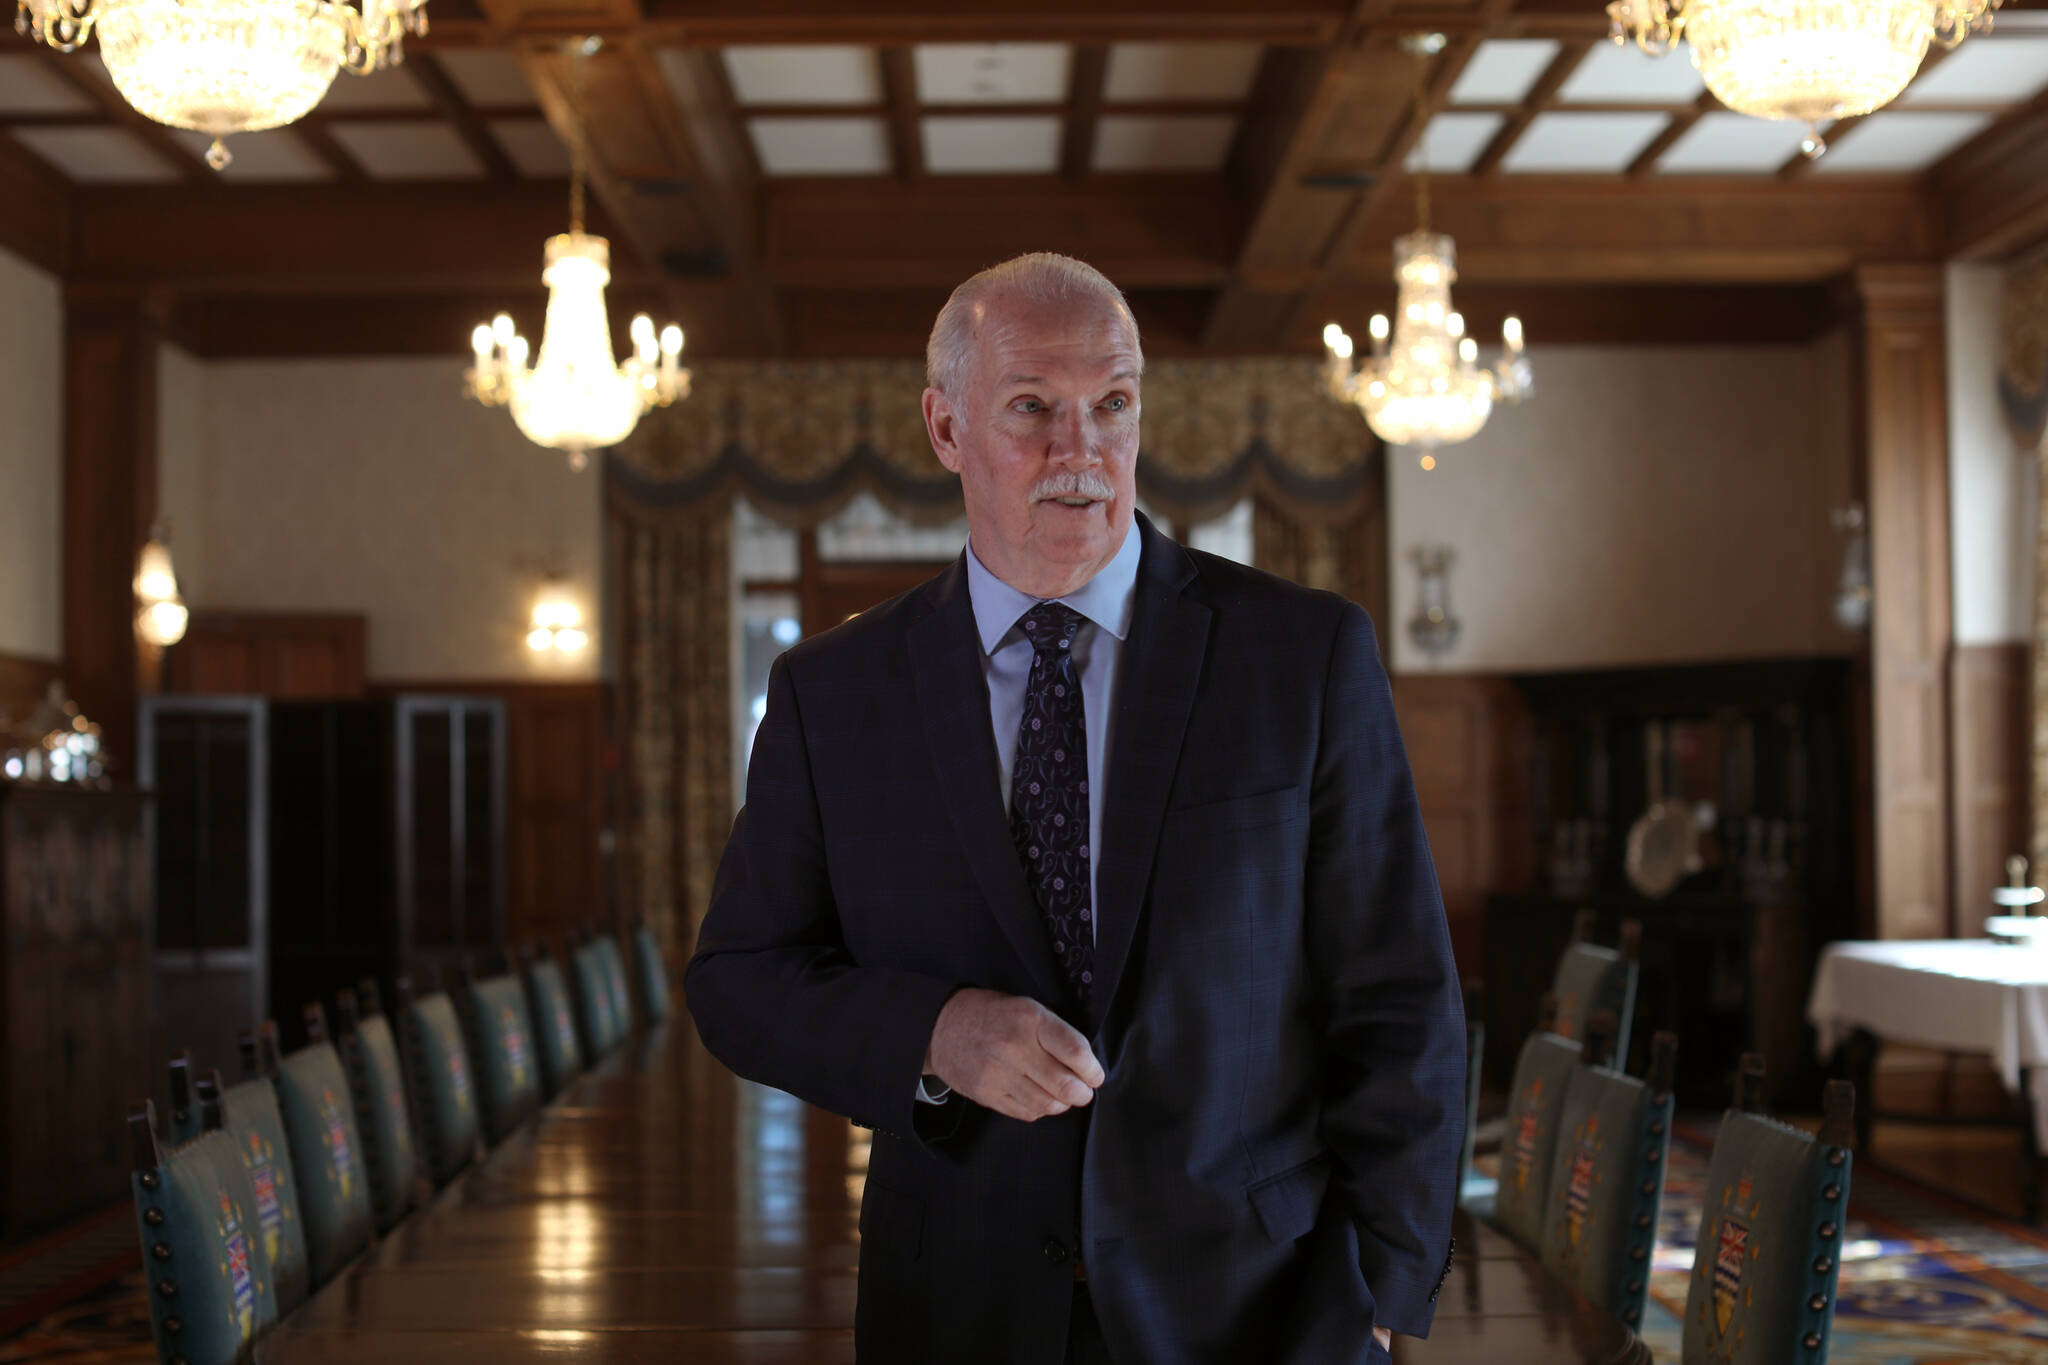 British Columbia Premier John Horgan attends swearing-in ceremony for cabinet changes at Government House in Victoria, Feb. 25, 2022. THE CANADIAN PRESS/Chad Hipolito